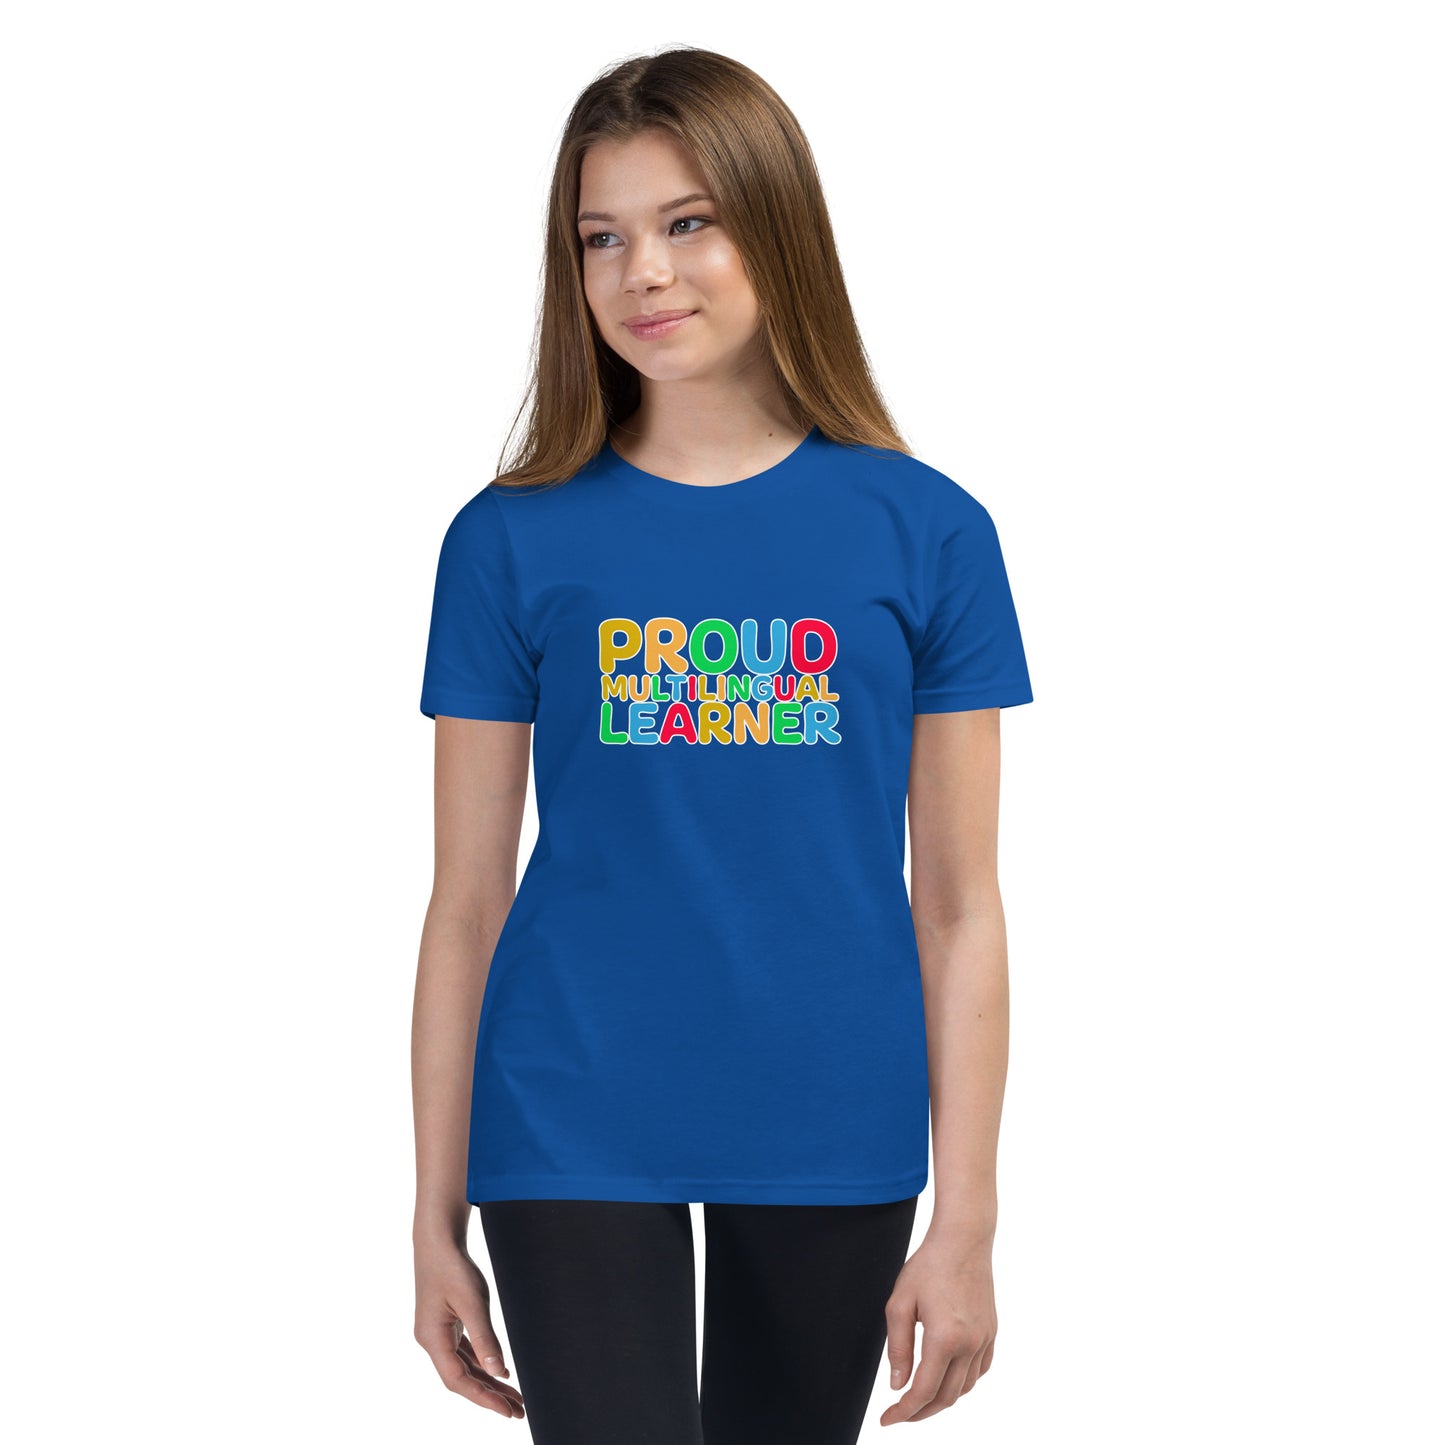 Multilingual Learner Youth Short Sleeve T-Shirt.